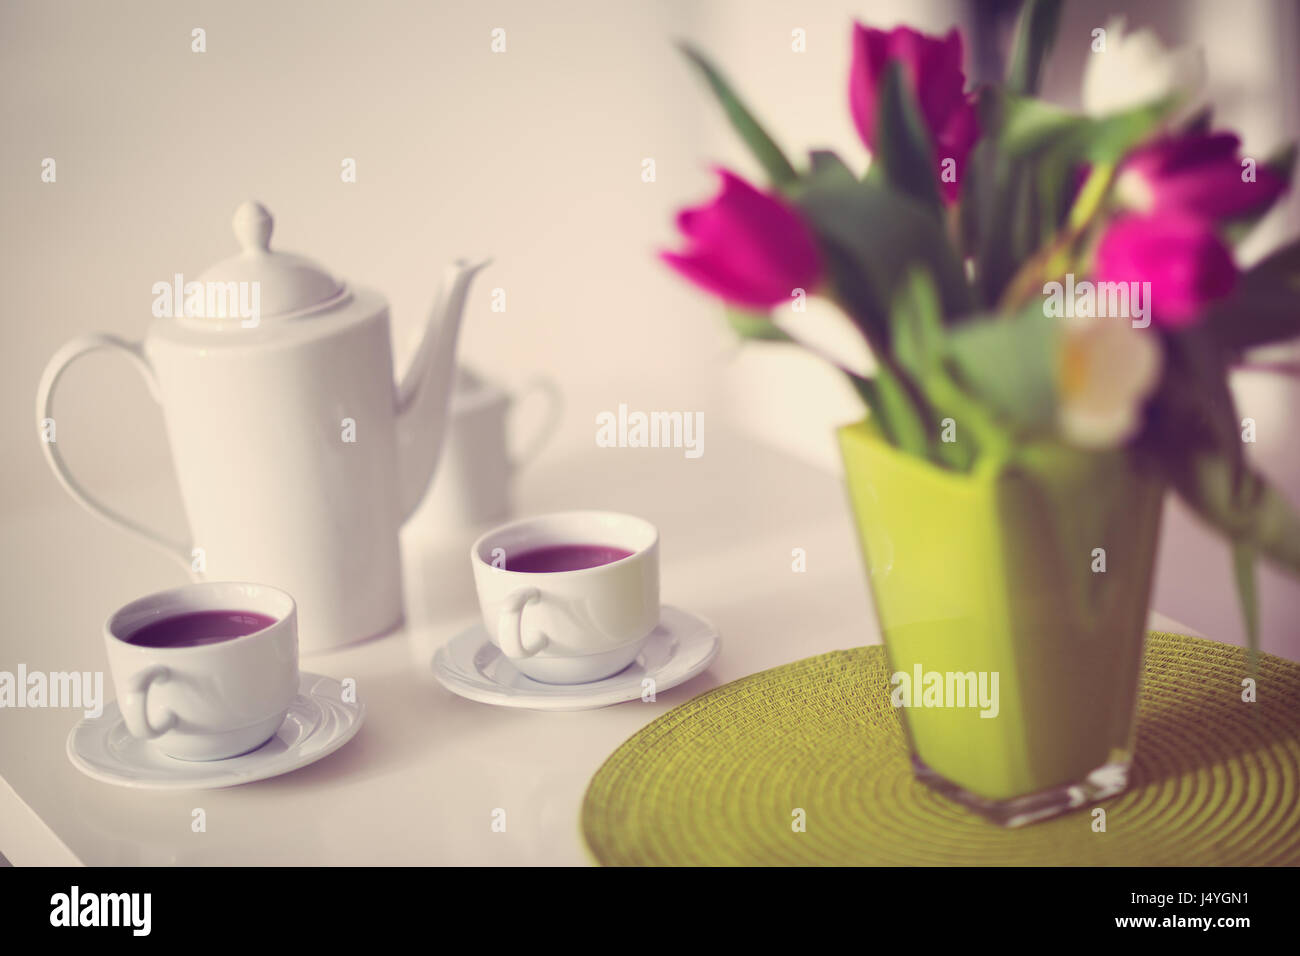 cups of tea with a teapot on decorated table Stock Photo